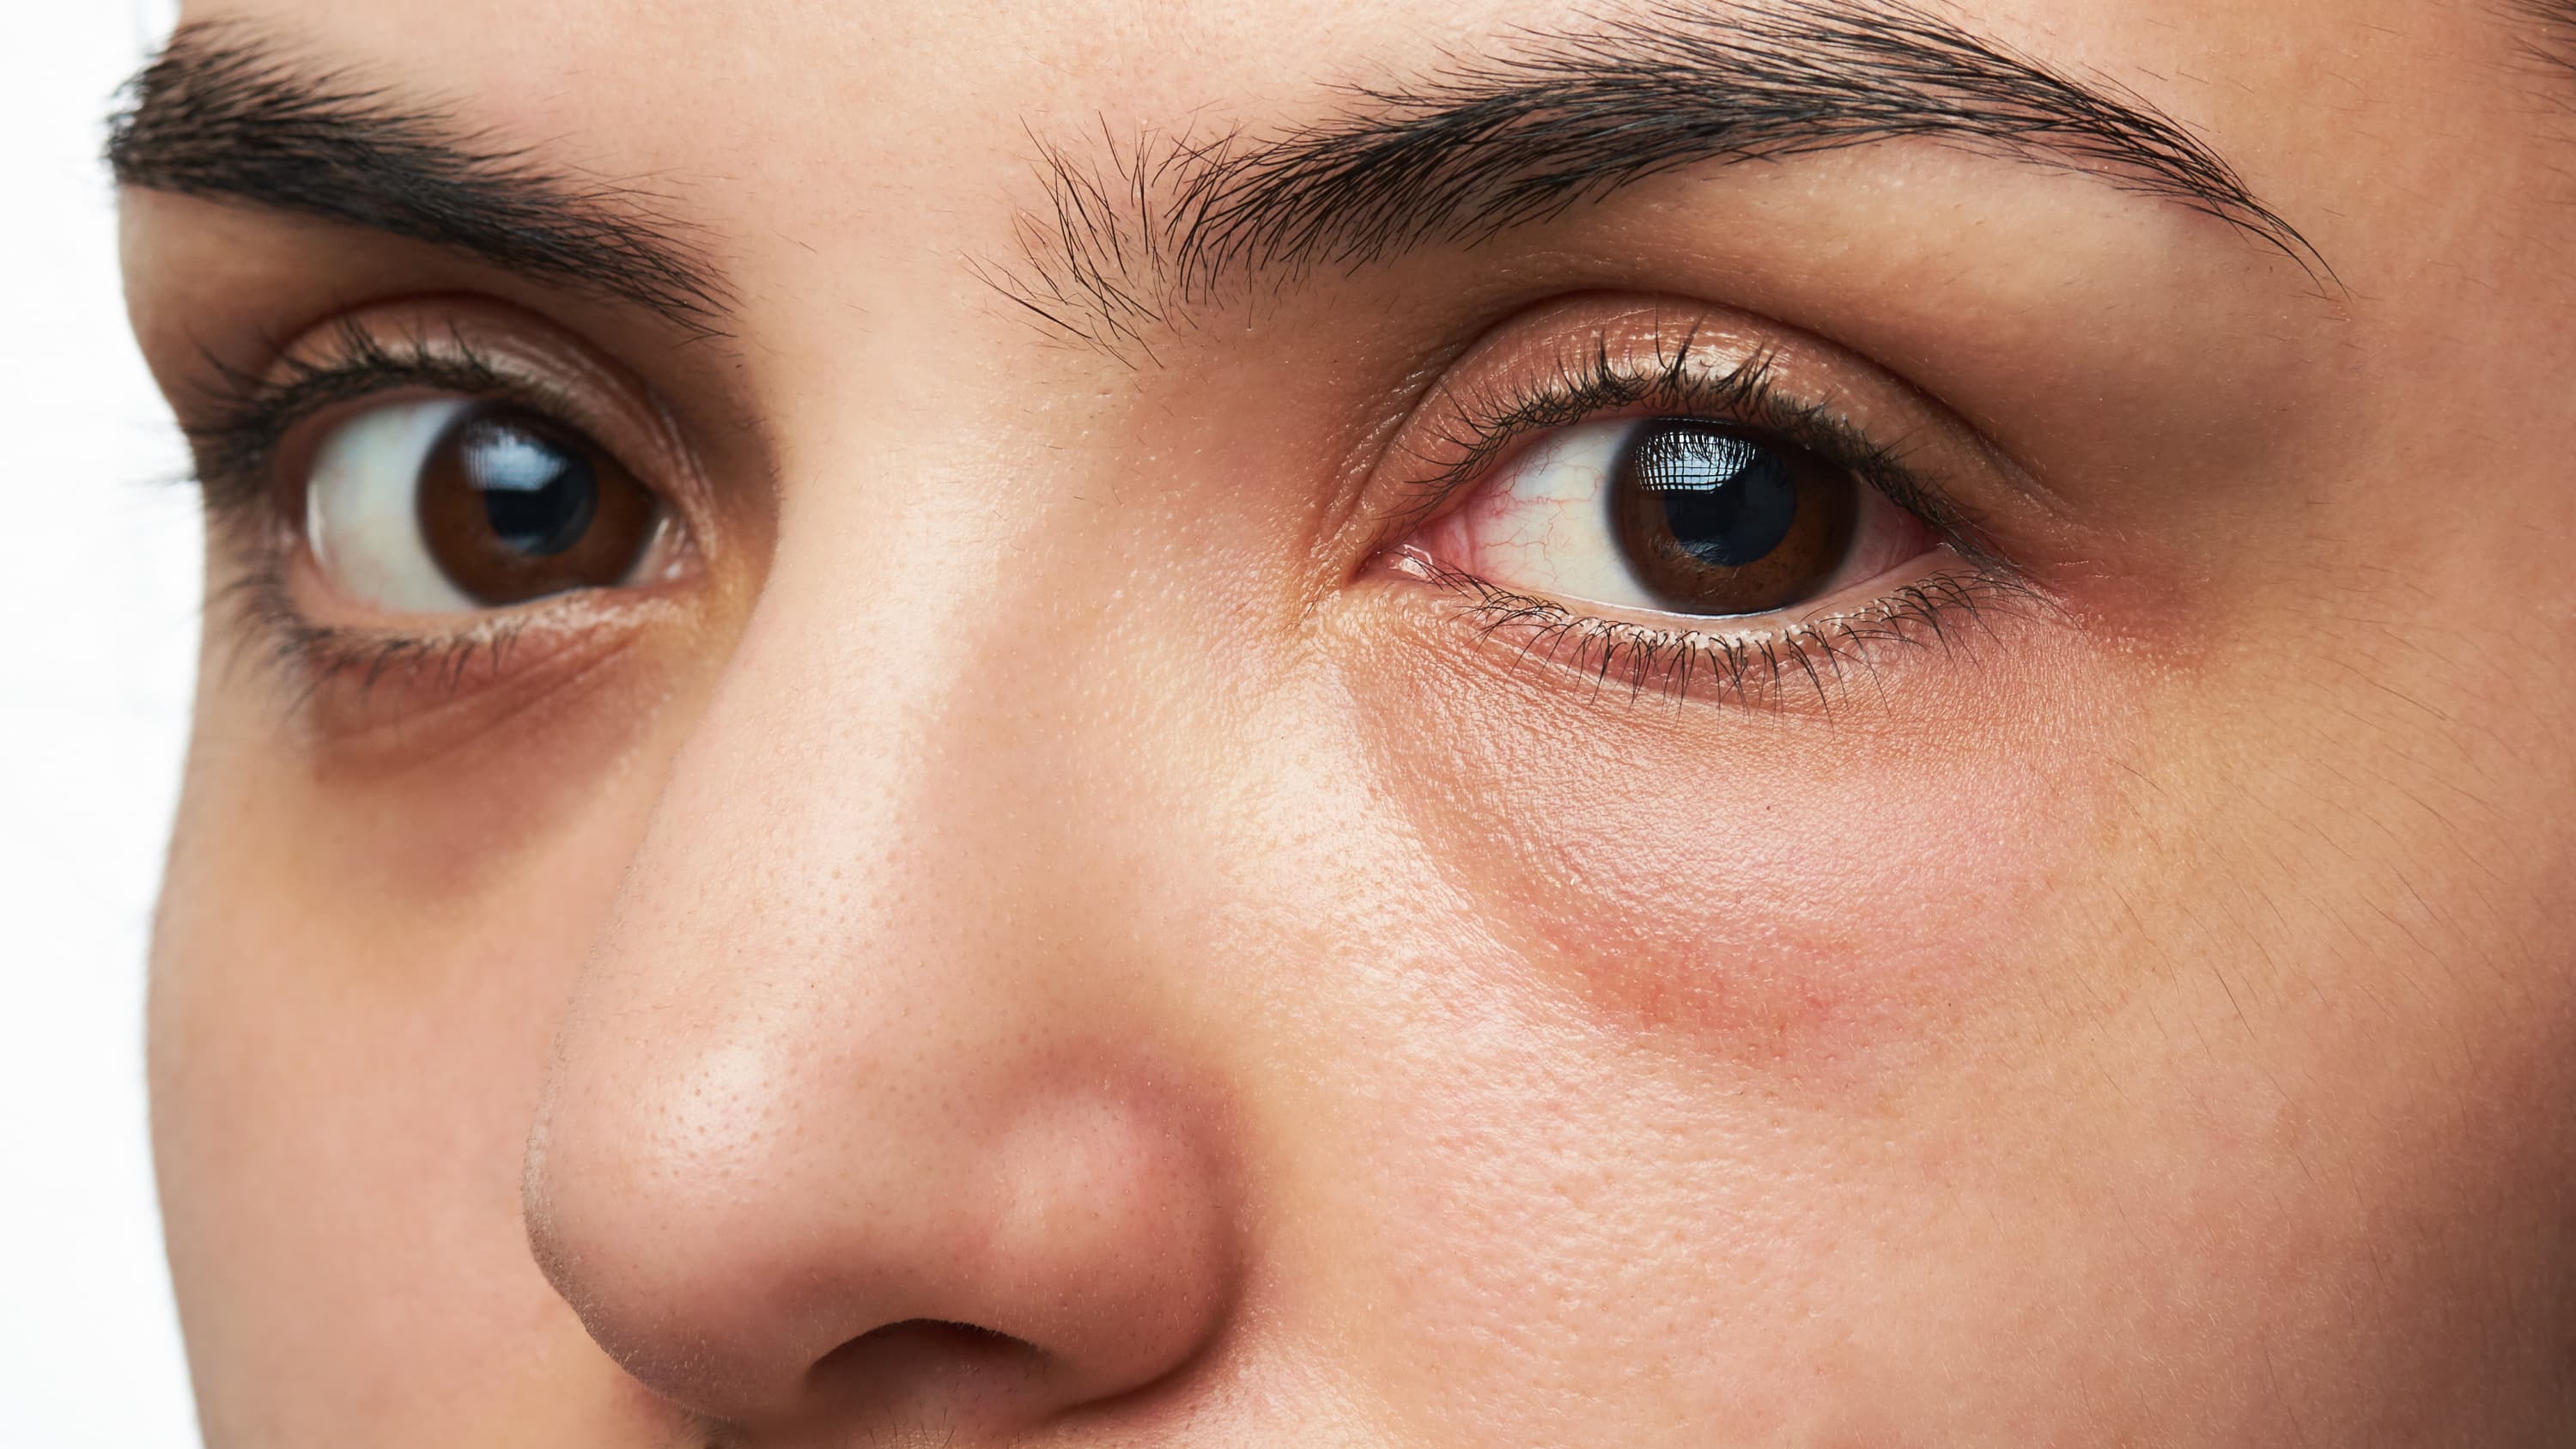 A close-up of a woman who possibly has a corneal abrasion